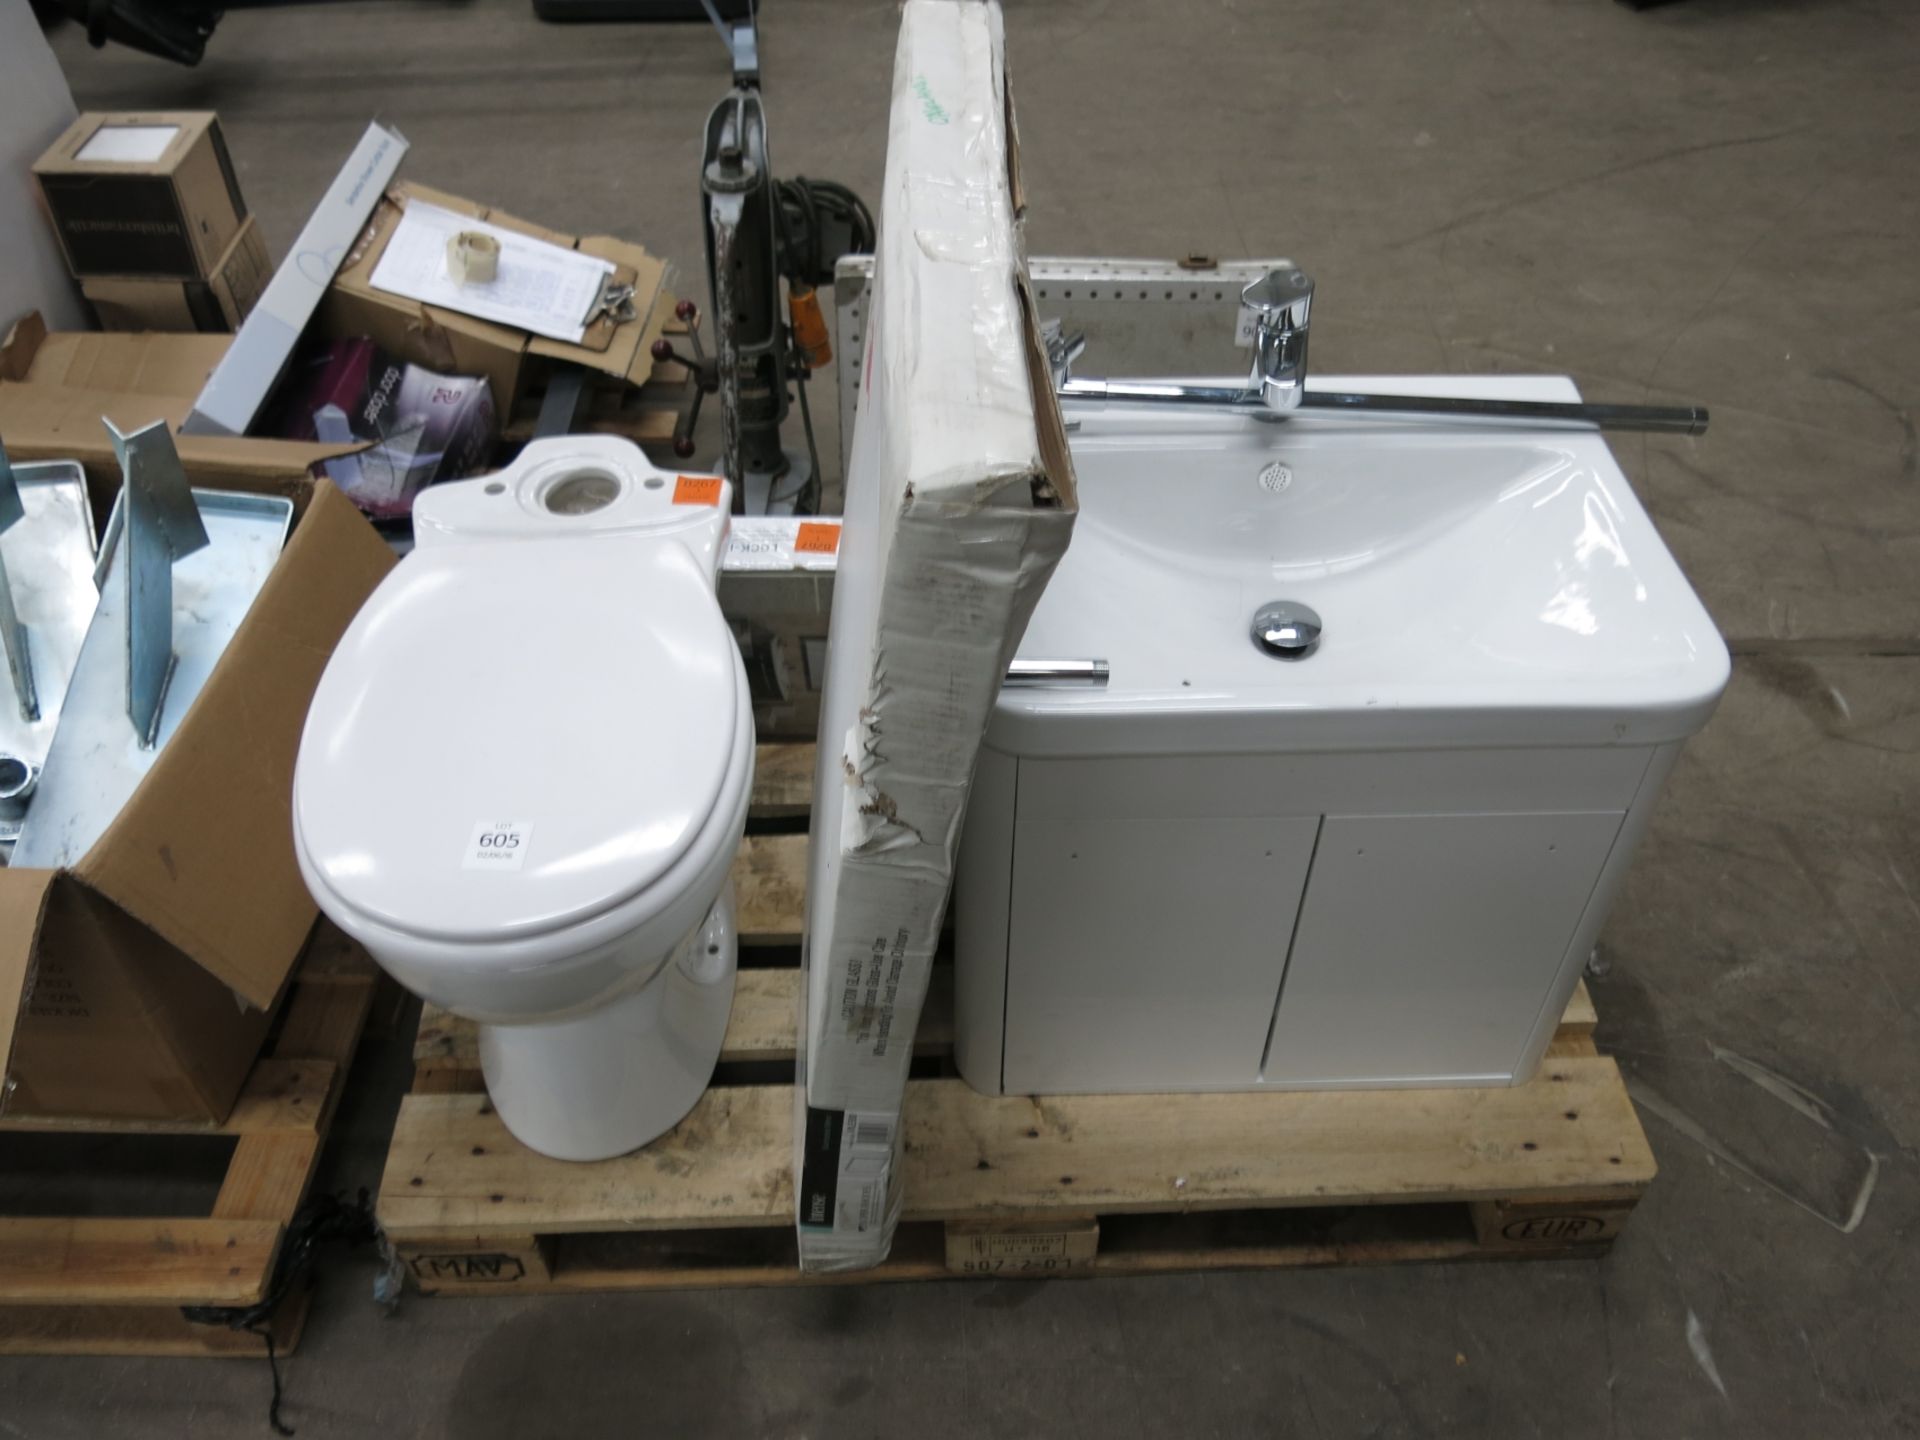 A Pallet to contain unused Toilet, Intense Illuminated Heated Demister Mirror, Sink Unit, 1 x Pack